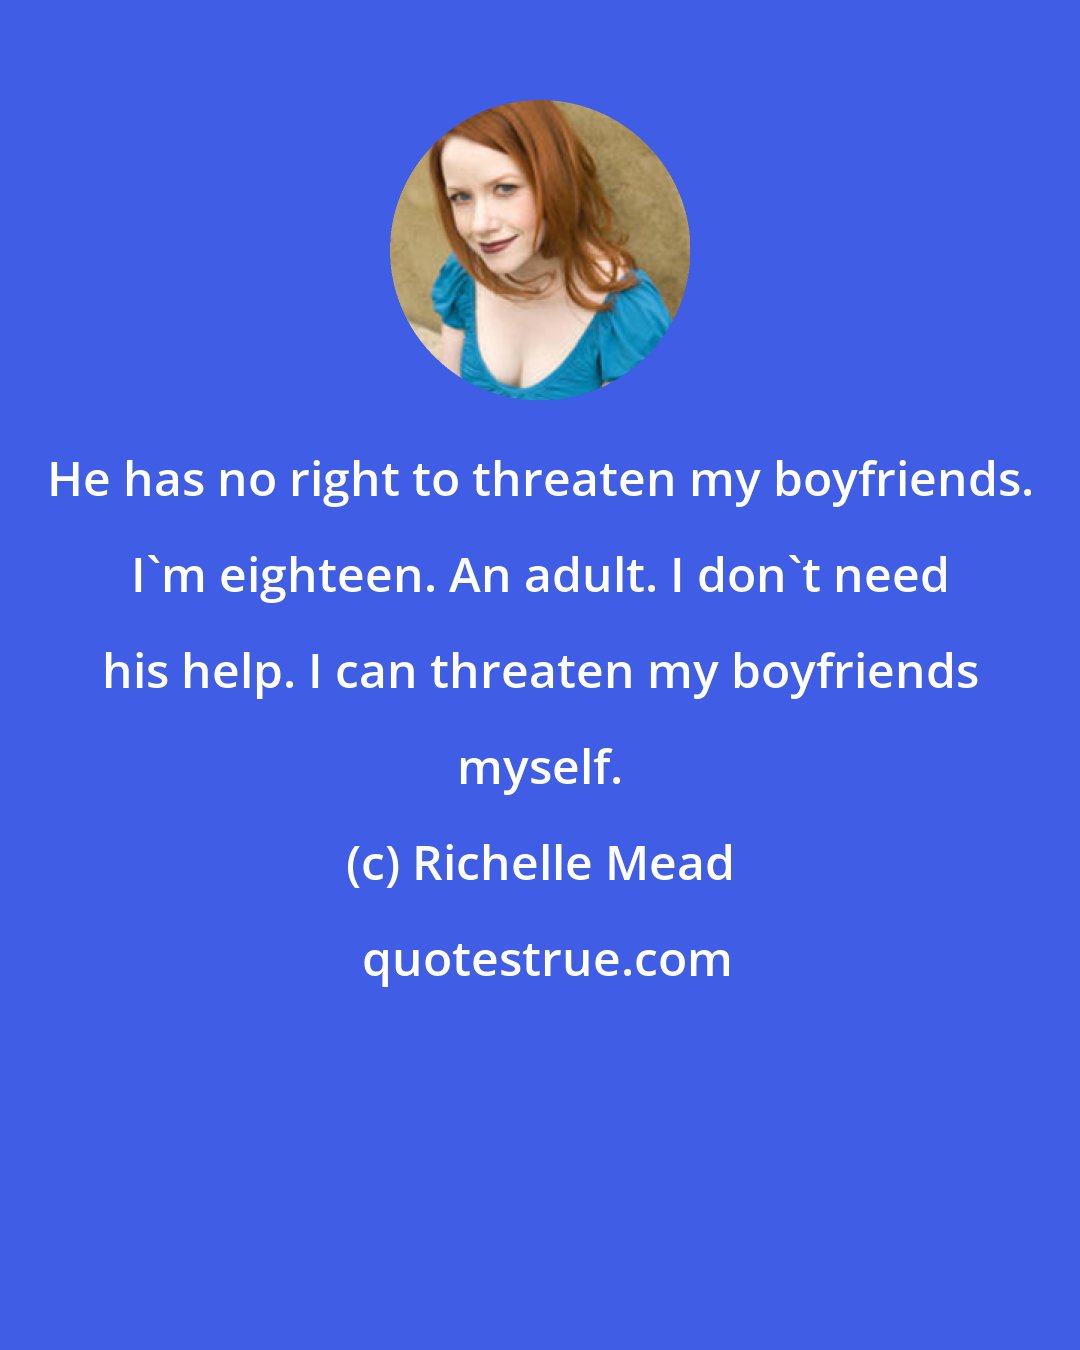 Richelle Mead: He has no right to threaten my boyfriends. I'm eighteen. An adult. I don't need his help. I can threaten my boyfriends myself.